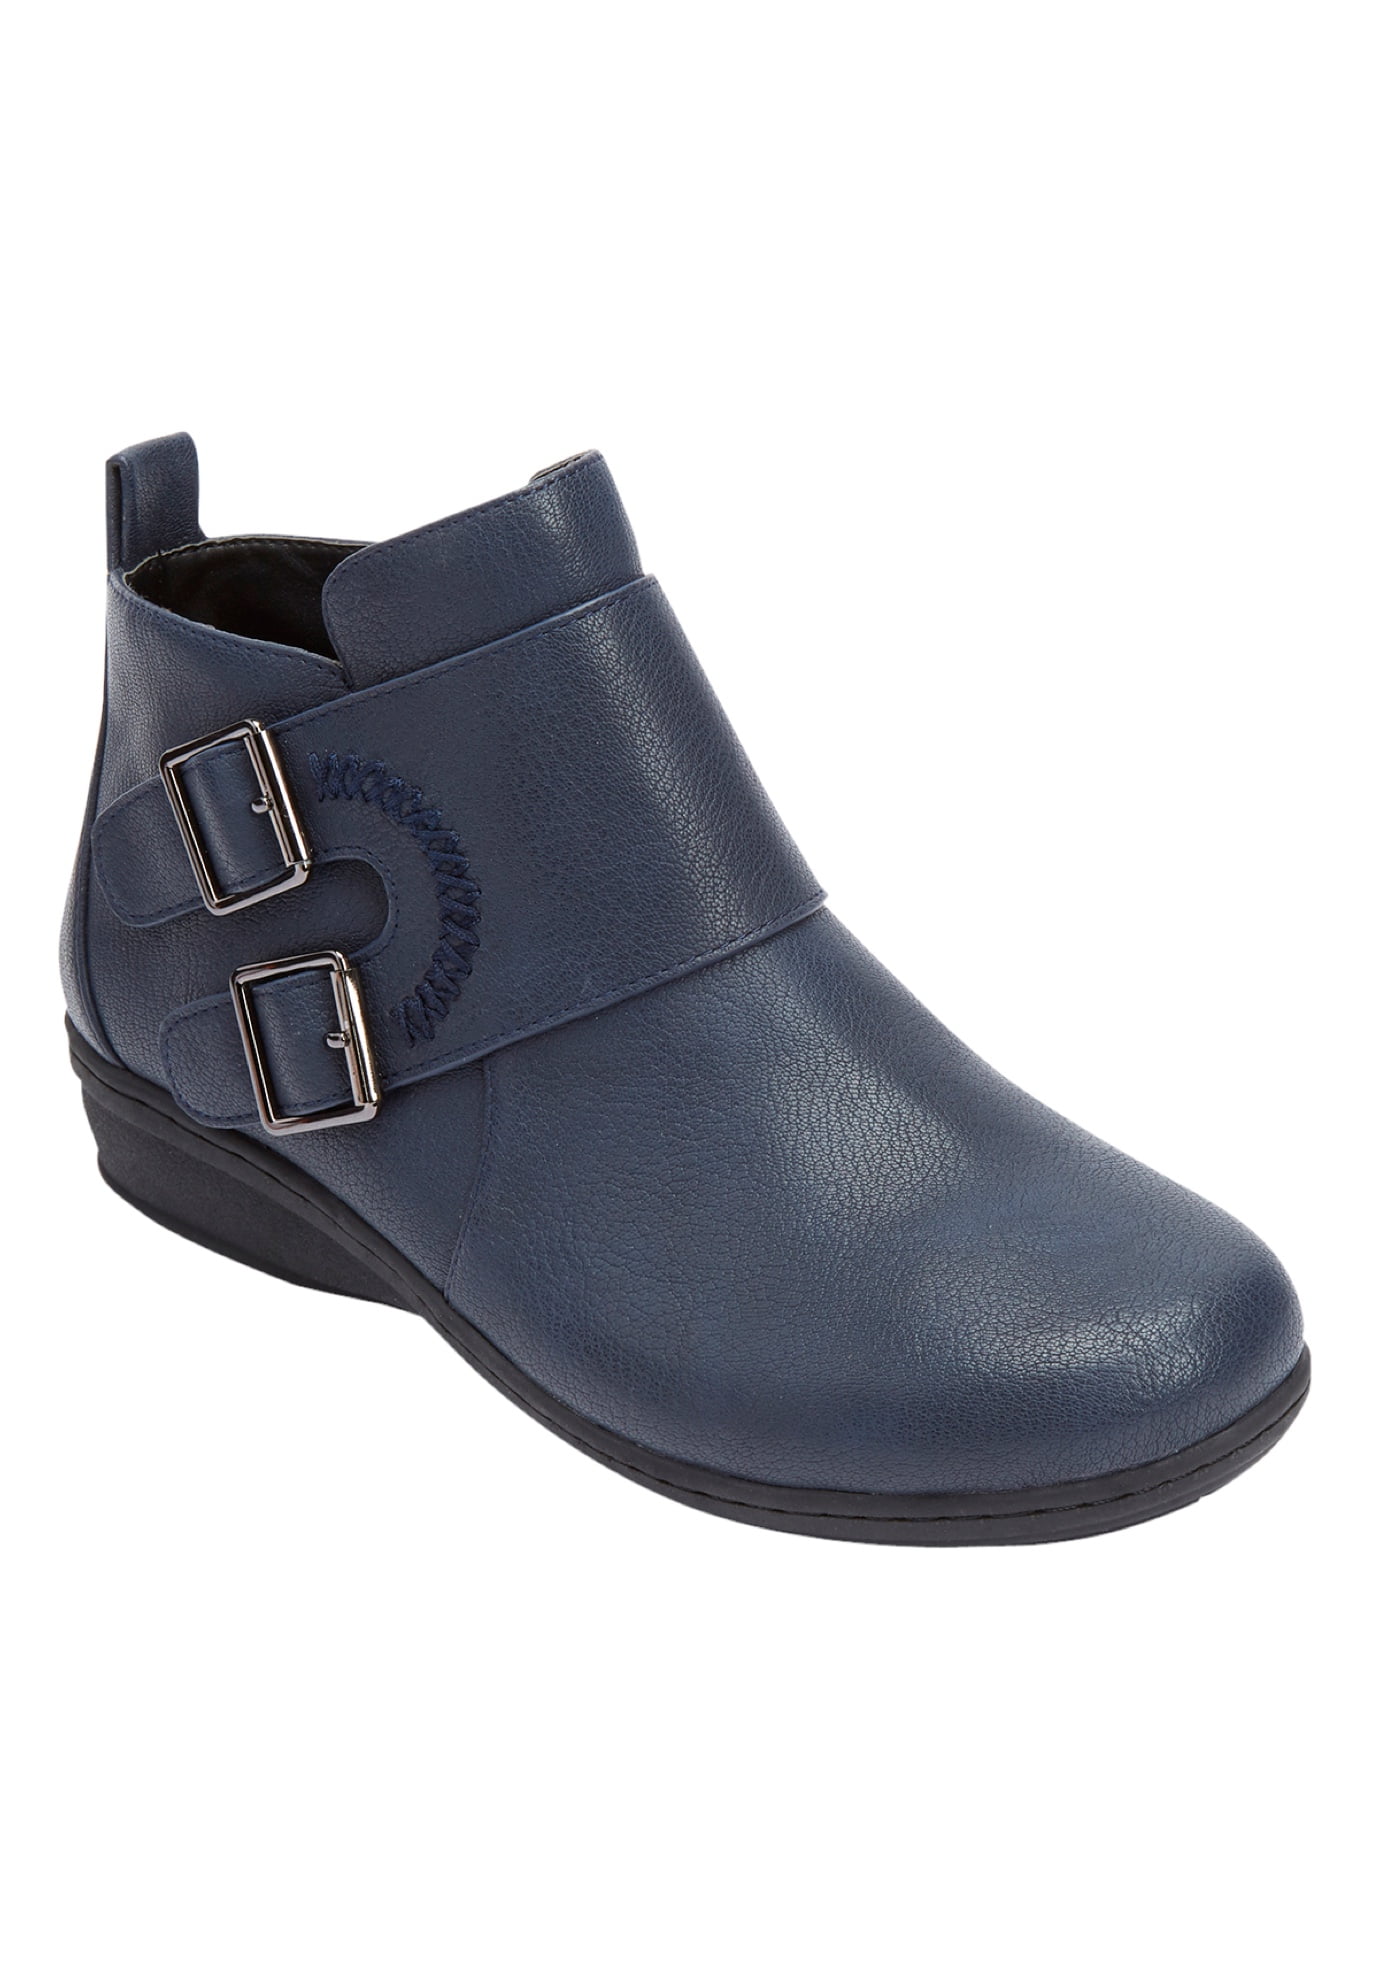 Sale > navy leather ladies boots > in stock